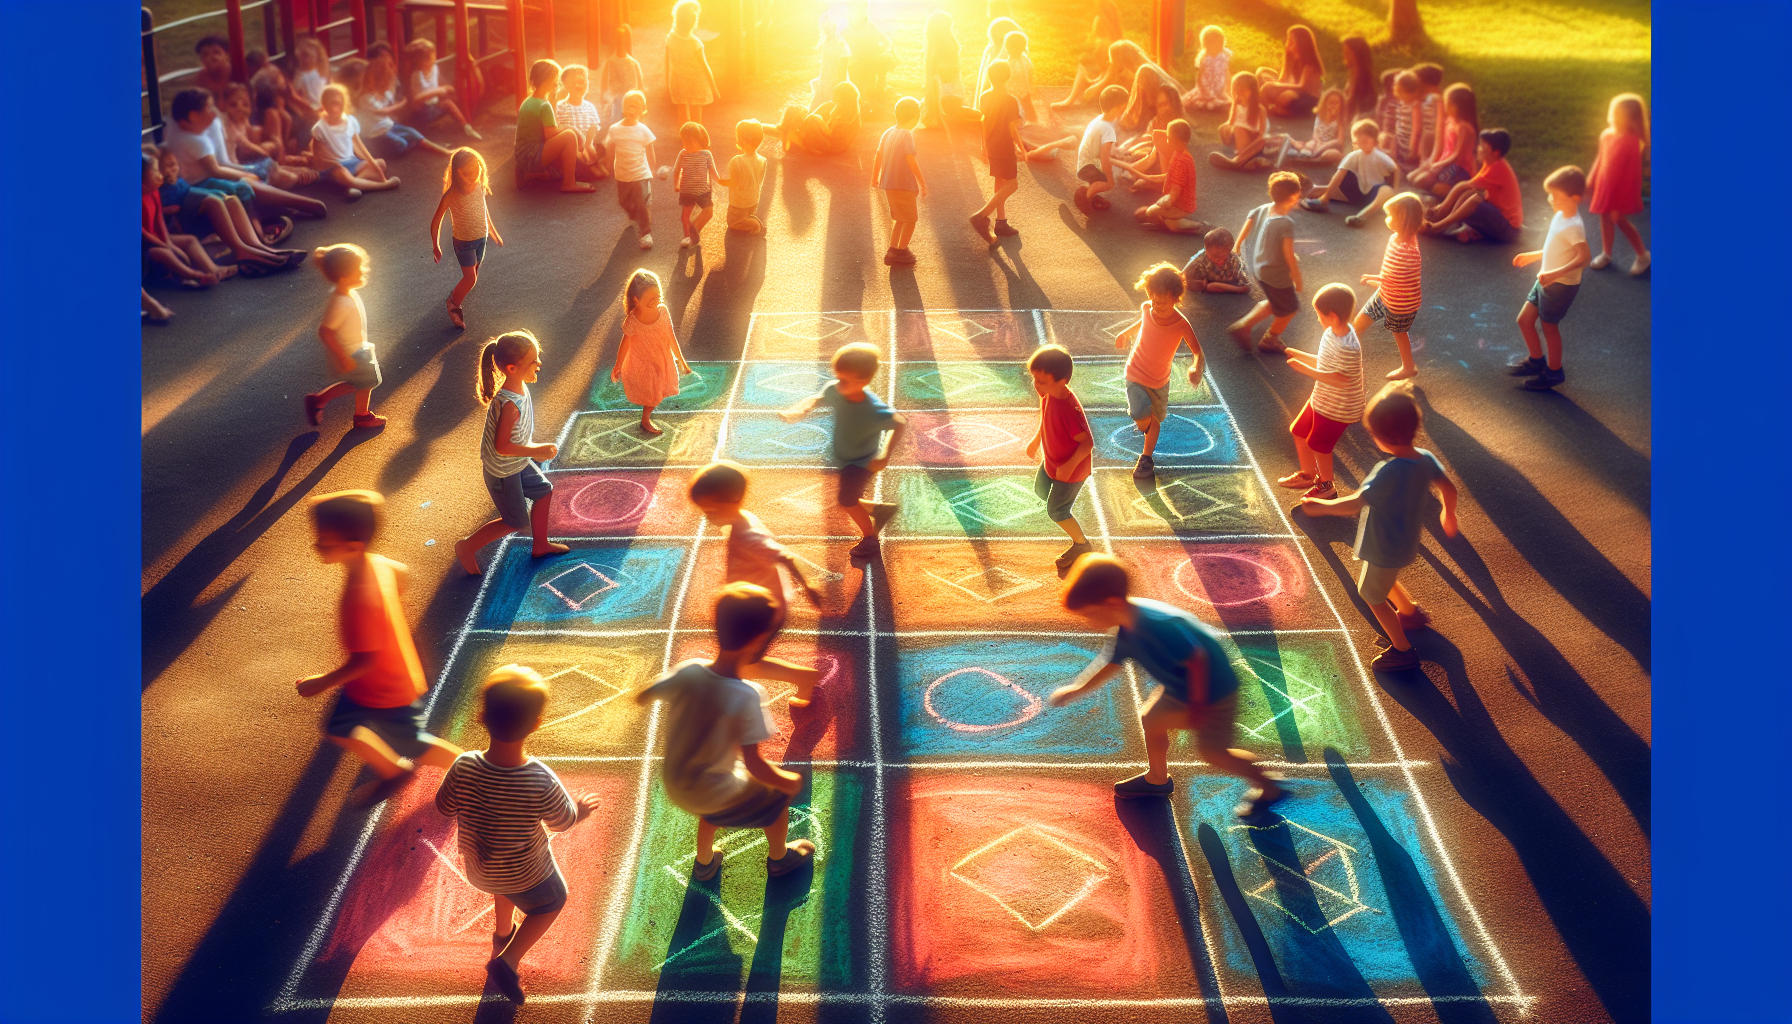 Children playing Four Square with colorful chalk-drawn squares